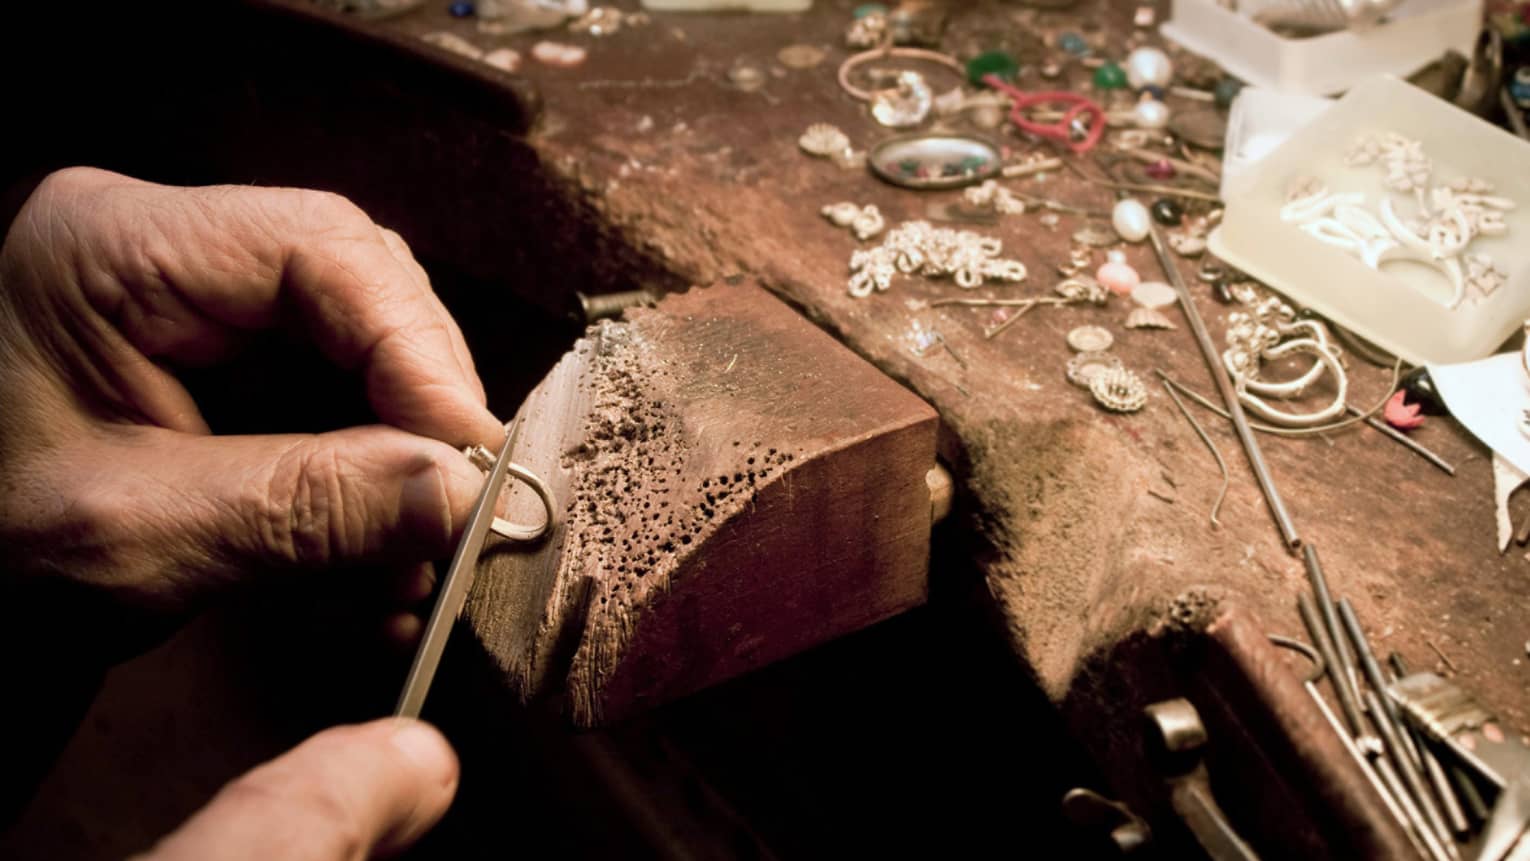 Jeweller's hands using a tool to craft jewellery on a wooden block